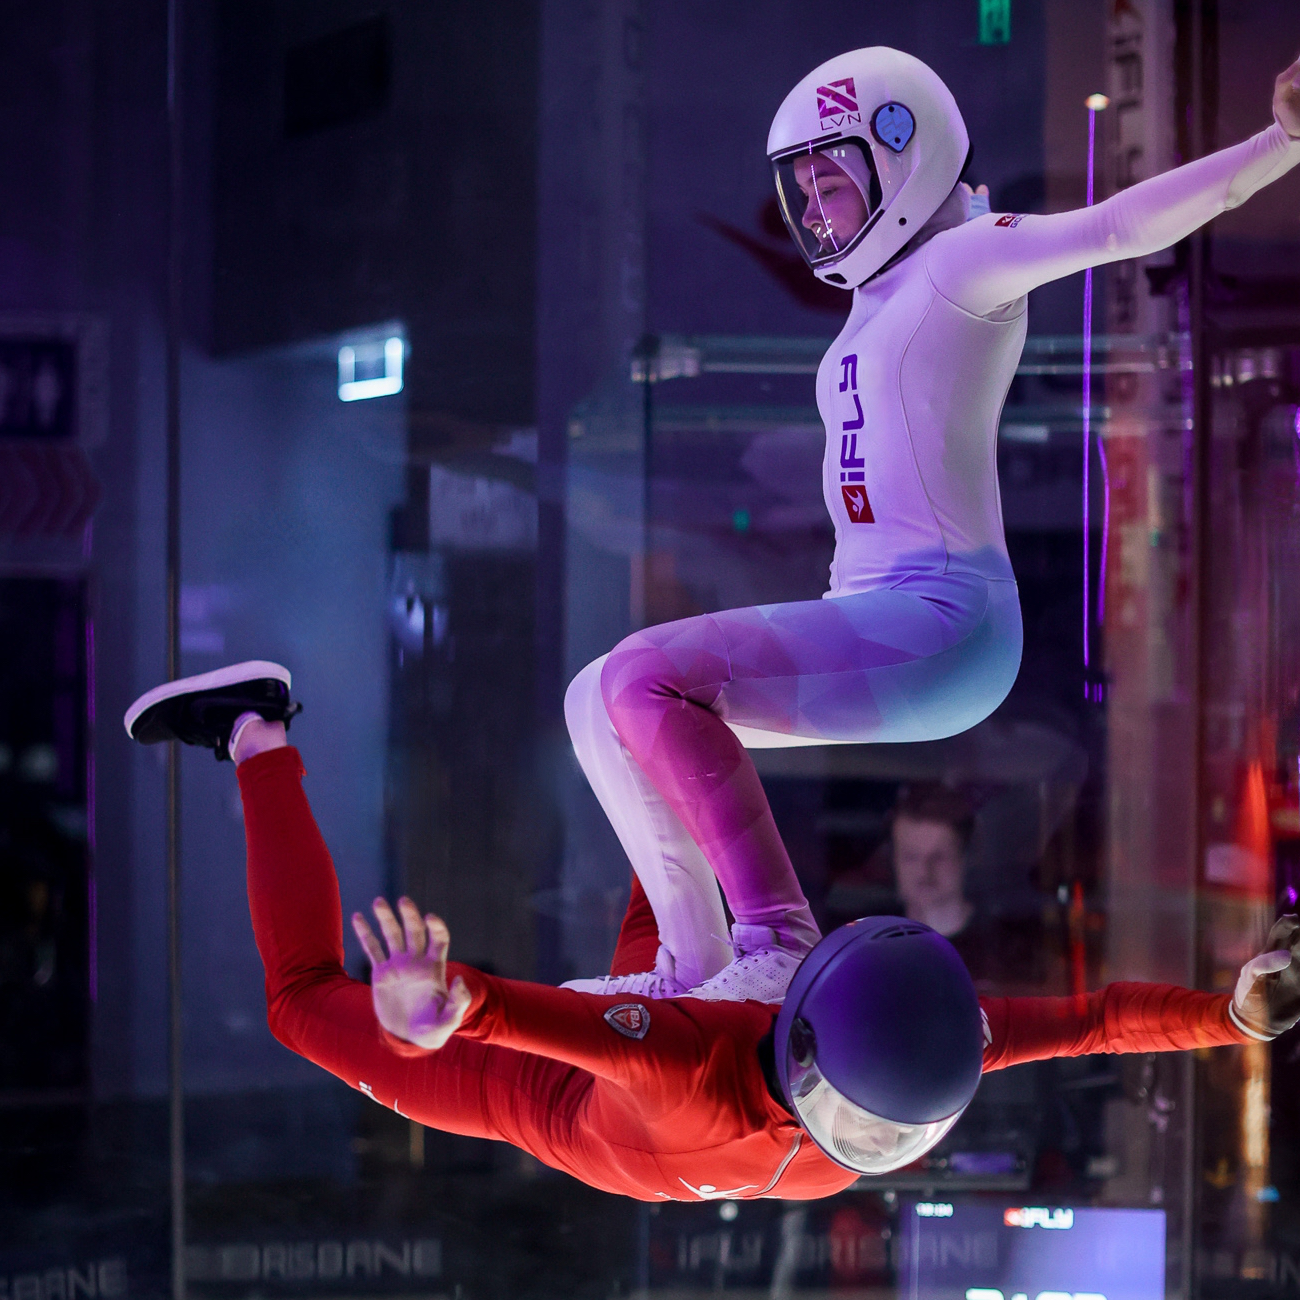 iFly Melbourne performance